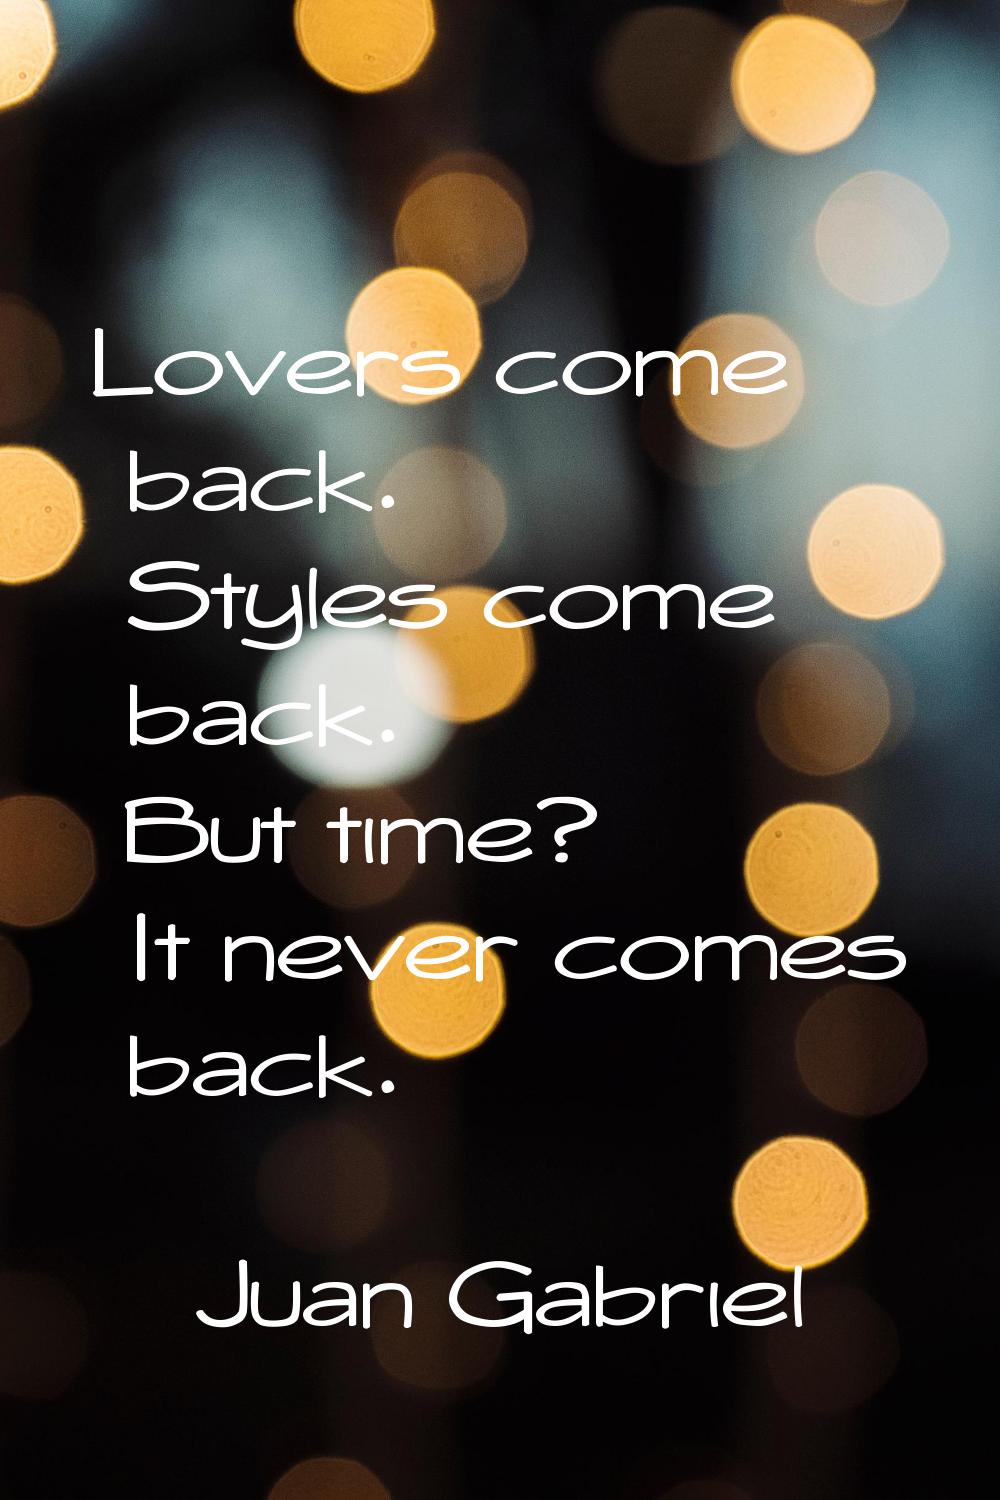 Lovers come back. Styles come back. But time? It never comes back.